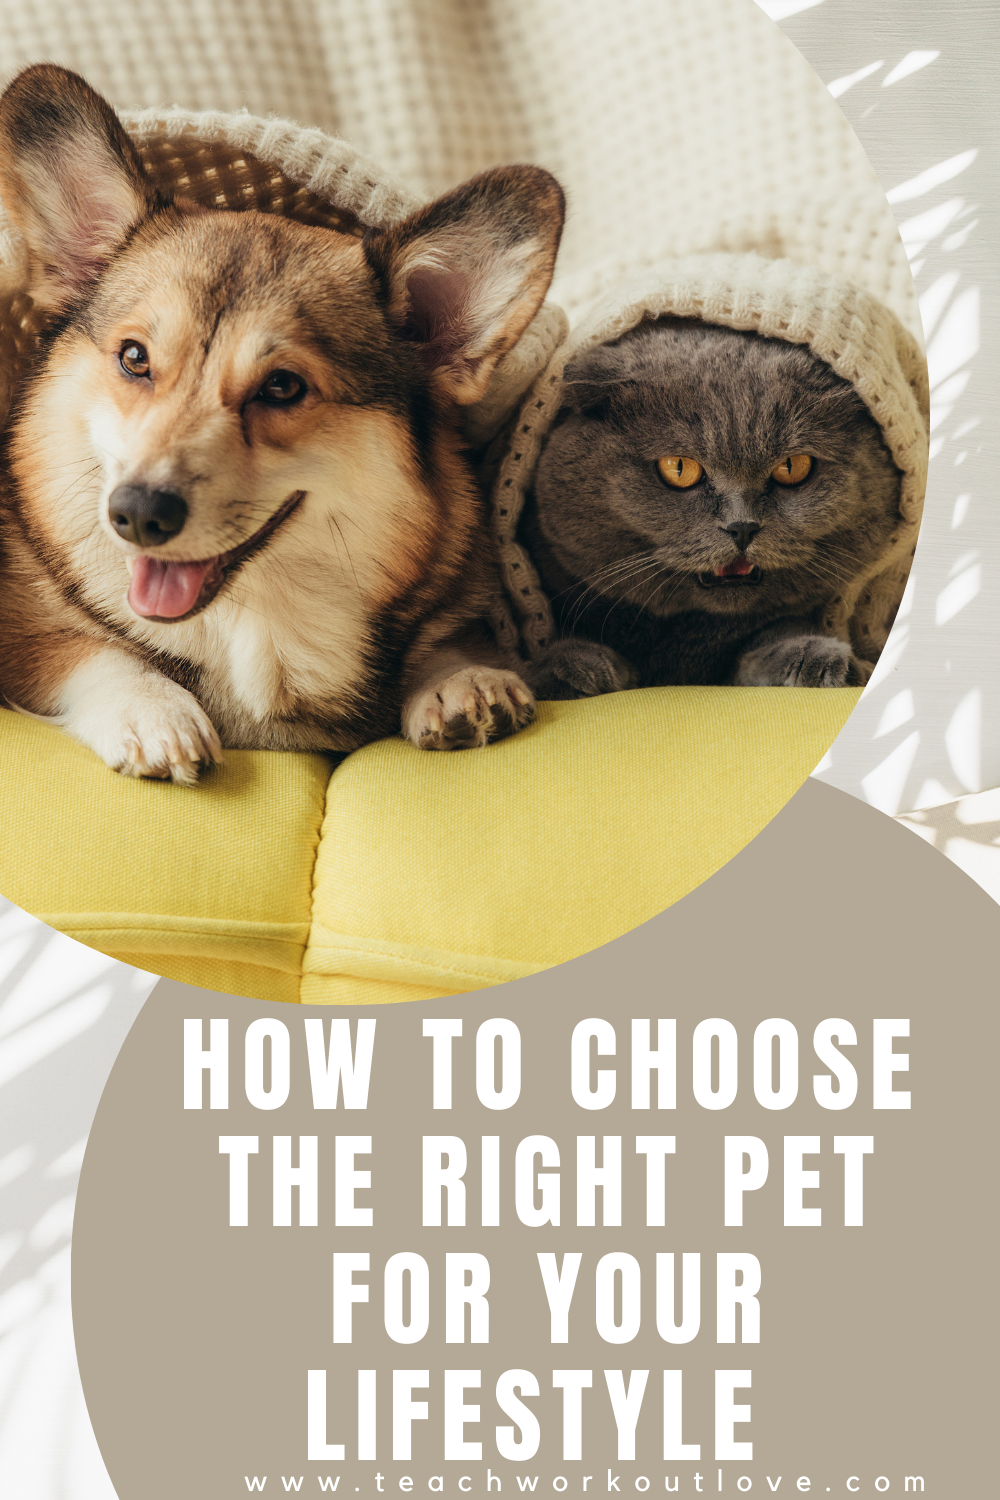 Whether you are a busy professional, a laid-back homebody, or an active adventurer who is always on the go, finding the right companion requires thoughtful consideration. Here are five considerations to help you select the perfect pet for your unique lifestyle.